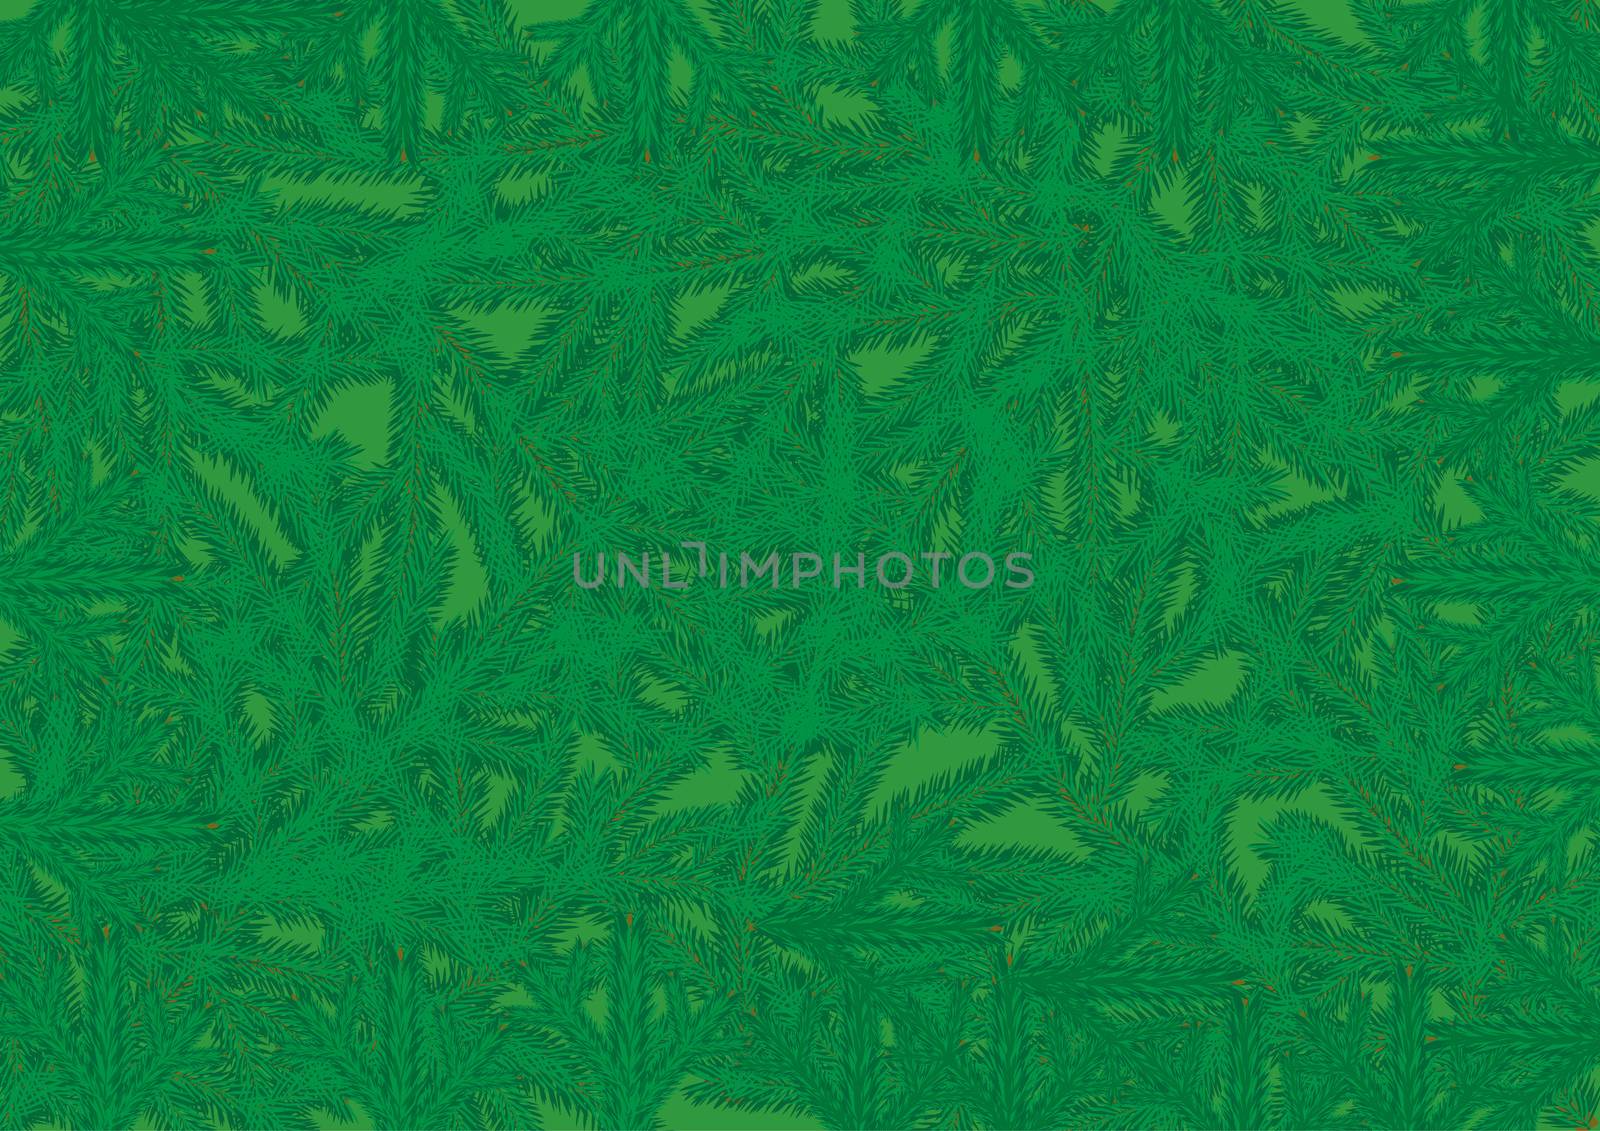 Background of Coniferous Tree Branches - Abstract Illustration